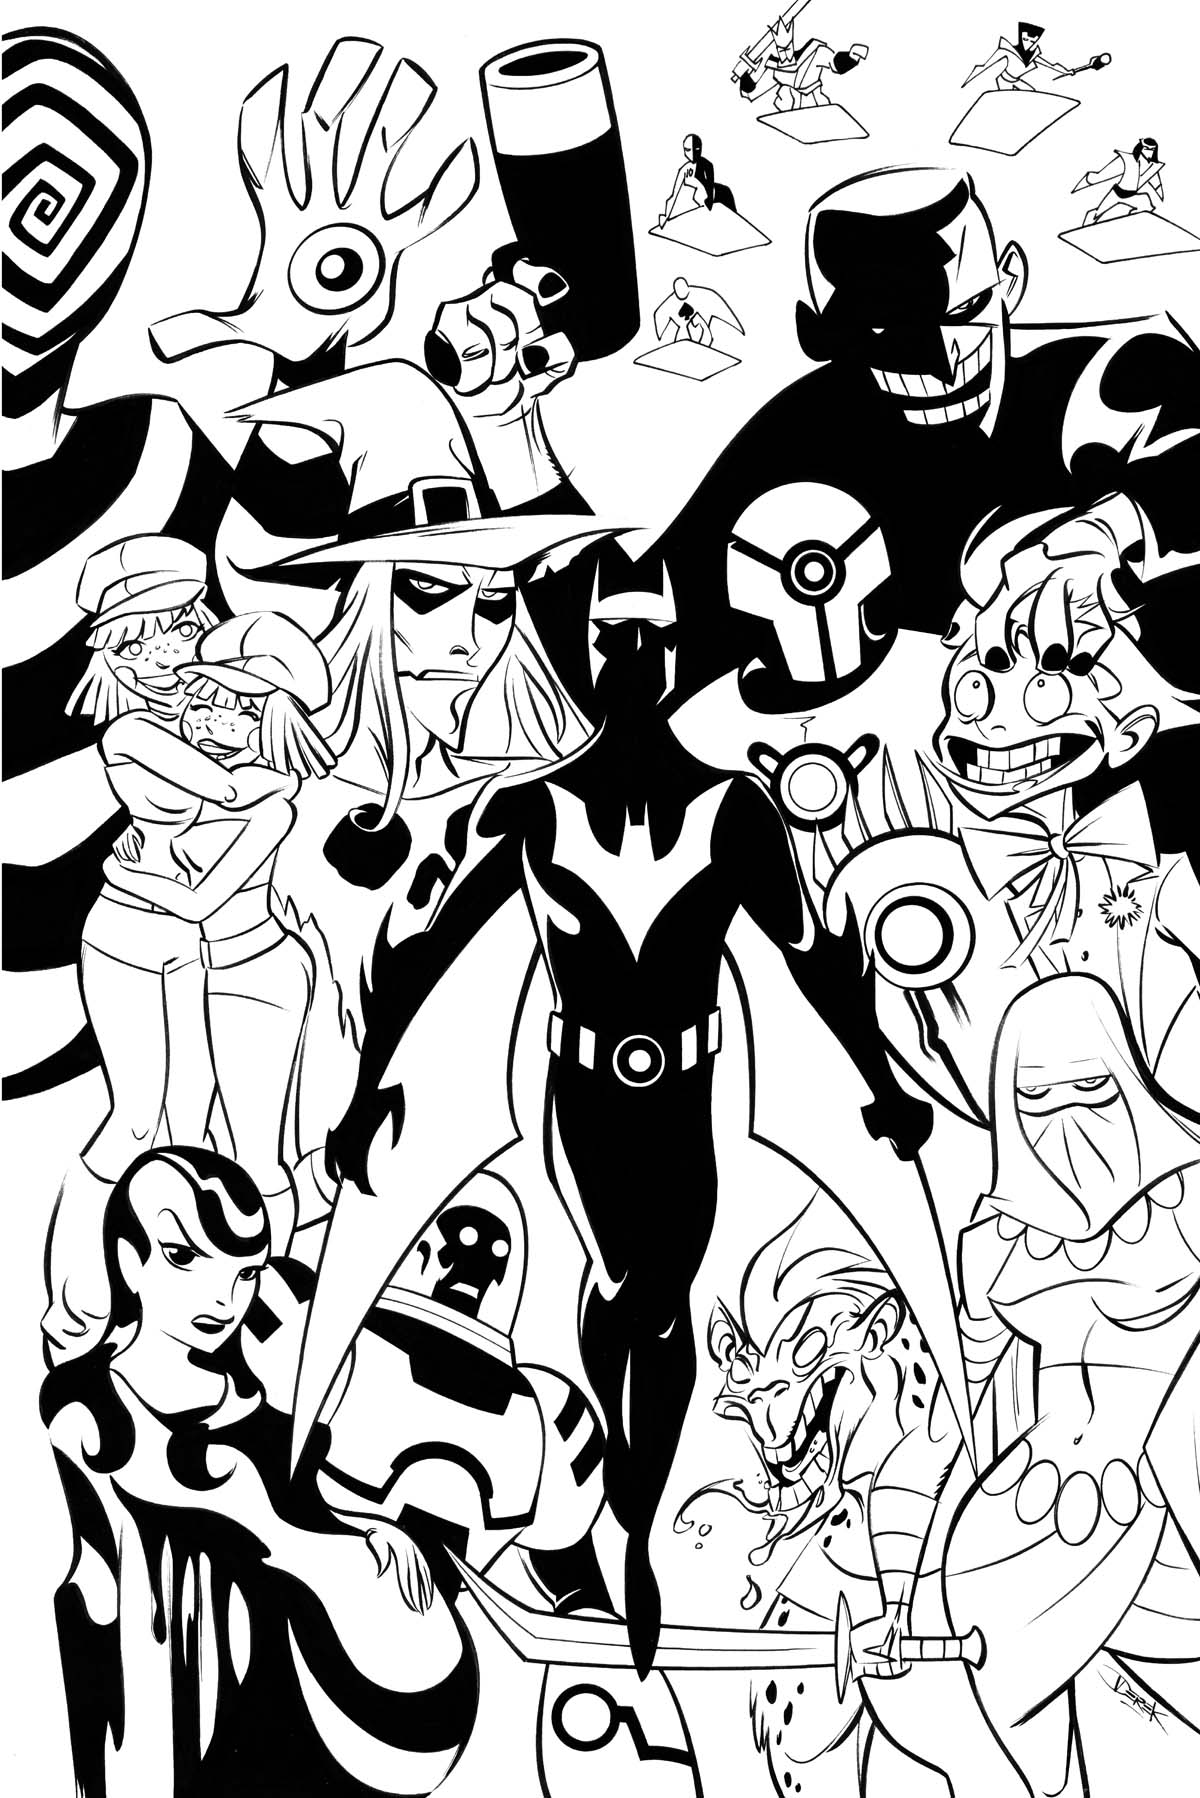 Nicest Batman Beyond Coloring Page